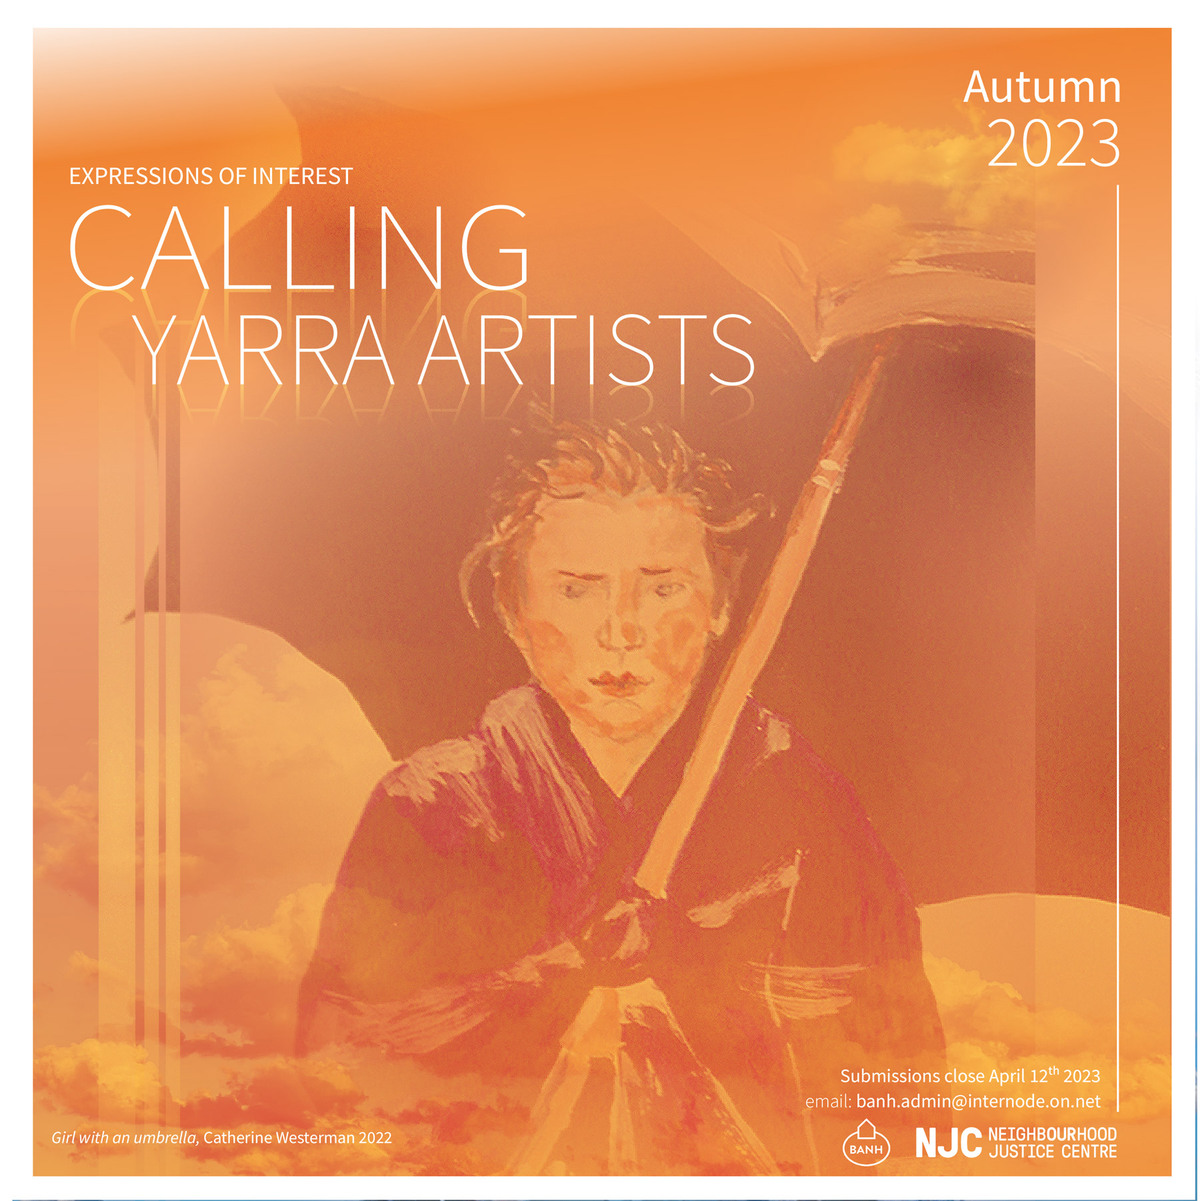 Orange washed out graphic painting of a cartoon person holding an umbrella, 'Calling Yarra Artists' is the main text.